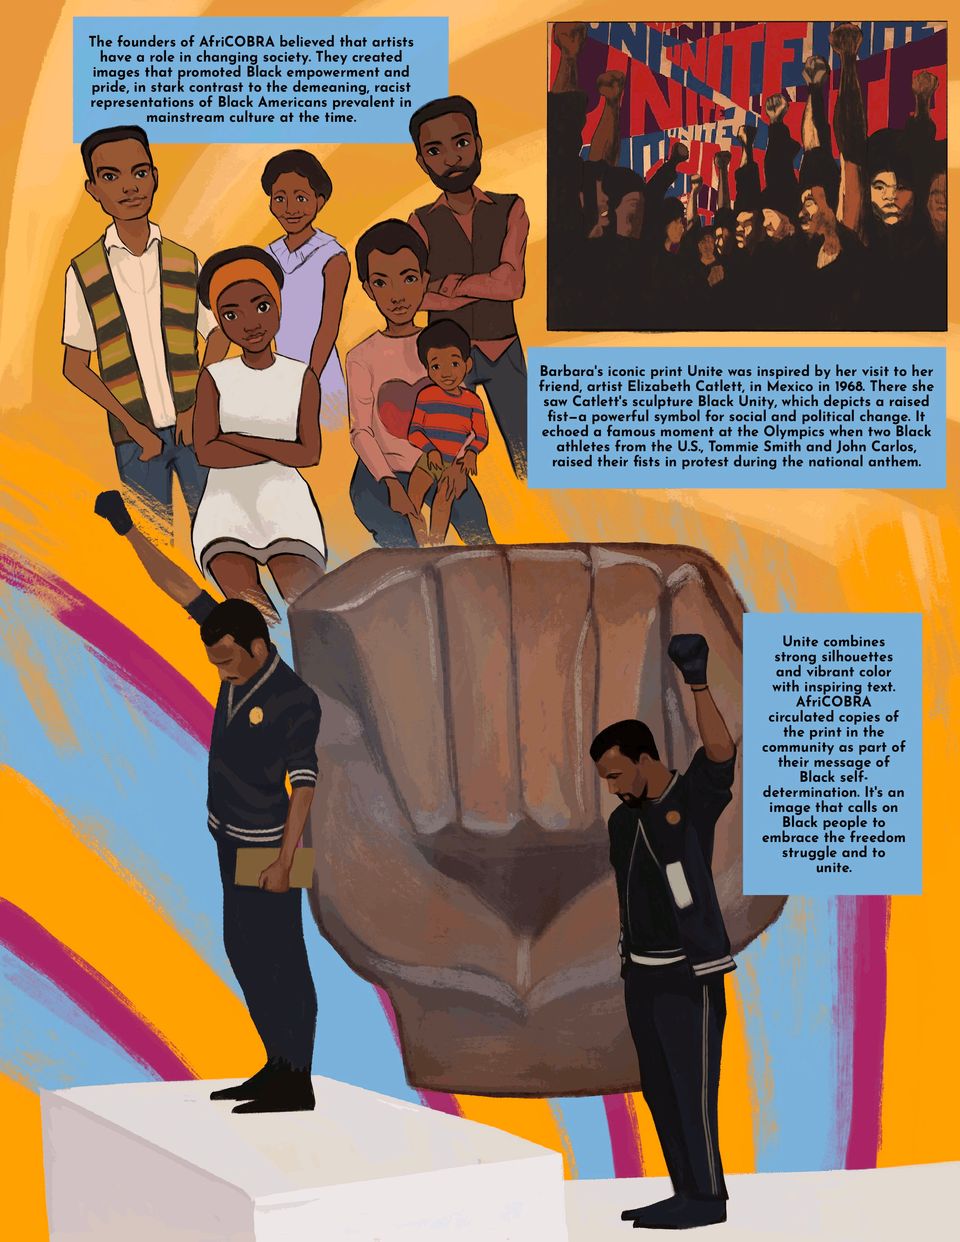 Written description and illustration showing Barbara's inspiration for her piece Unite, including an Elizabeth Catlett sculpture and the 1968 Olympics.